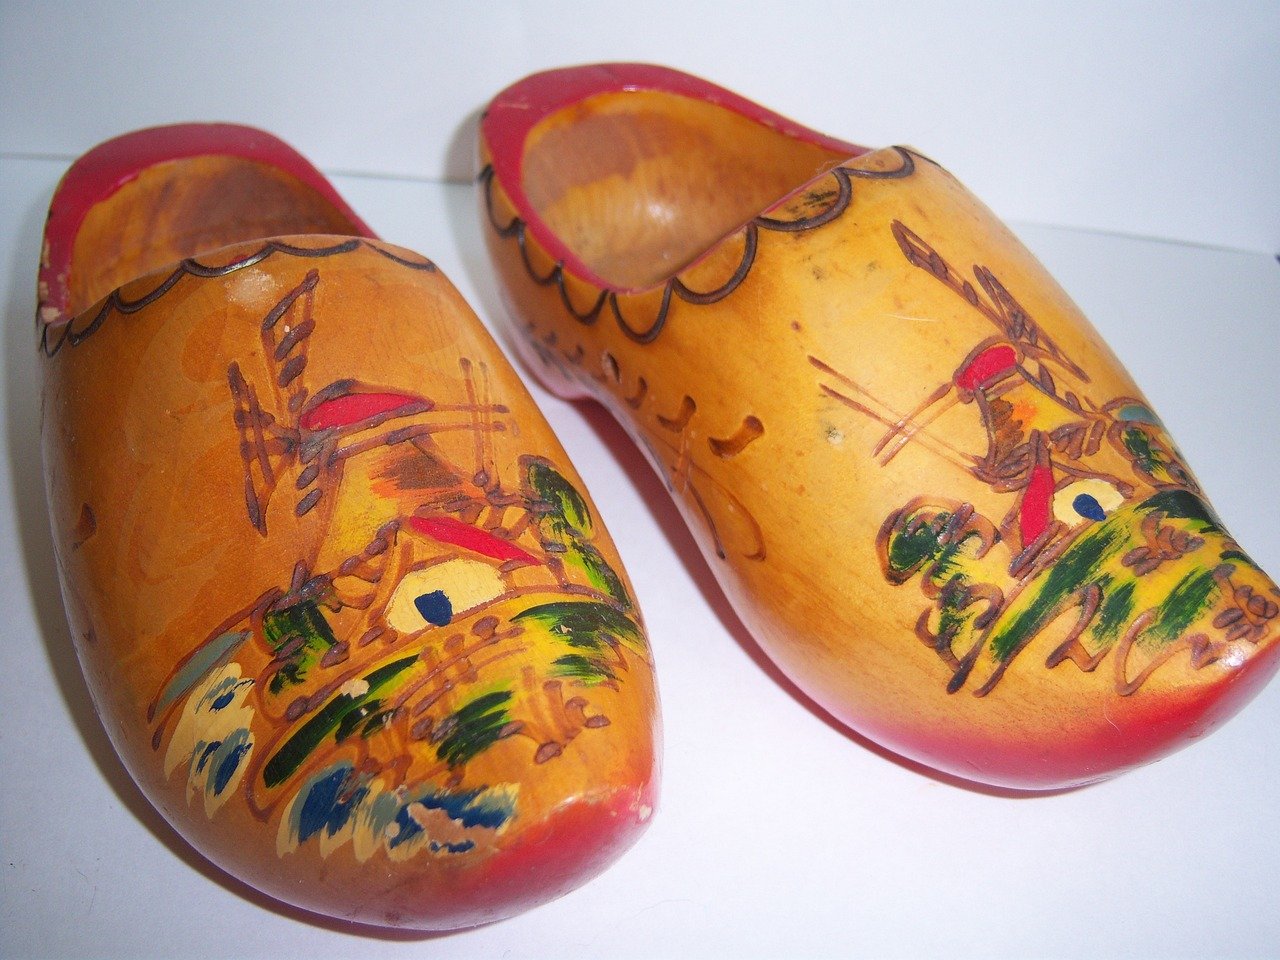 -up of a woman's feet wearing different sizes of sandals, with Indian and UK shoe size labels on each